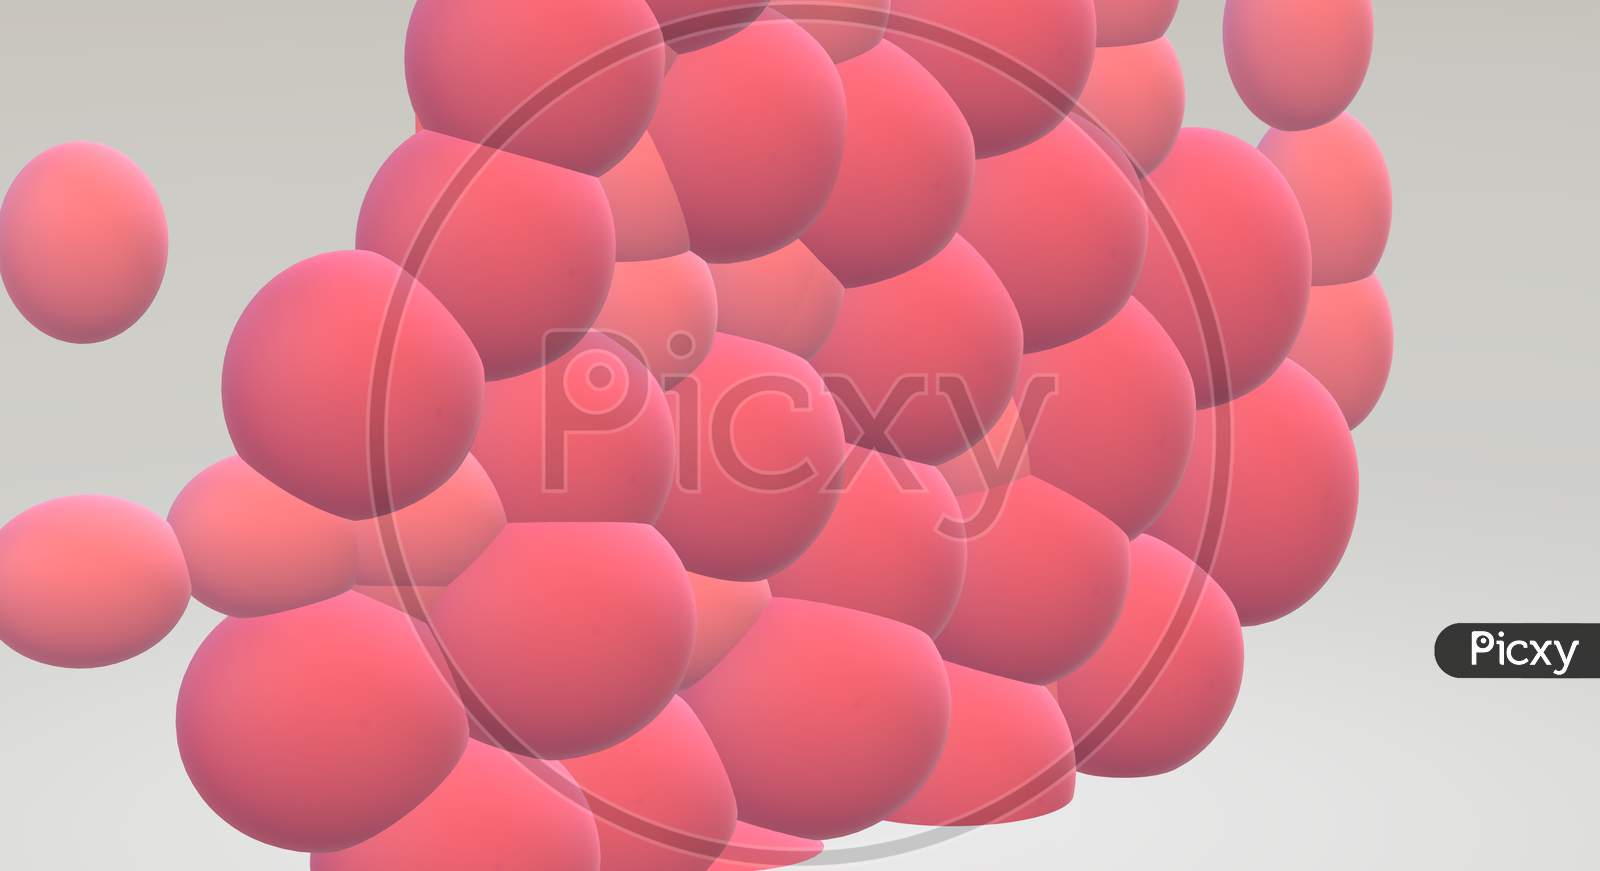 Abstract background with spheres. Flying spheres isolated on pink background.  The theme for trendy designs. Spheres in pink matte color. Side view Pink bubbles connected each other. 3D illustration.